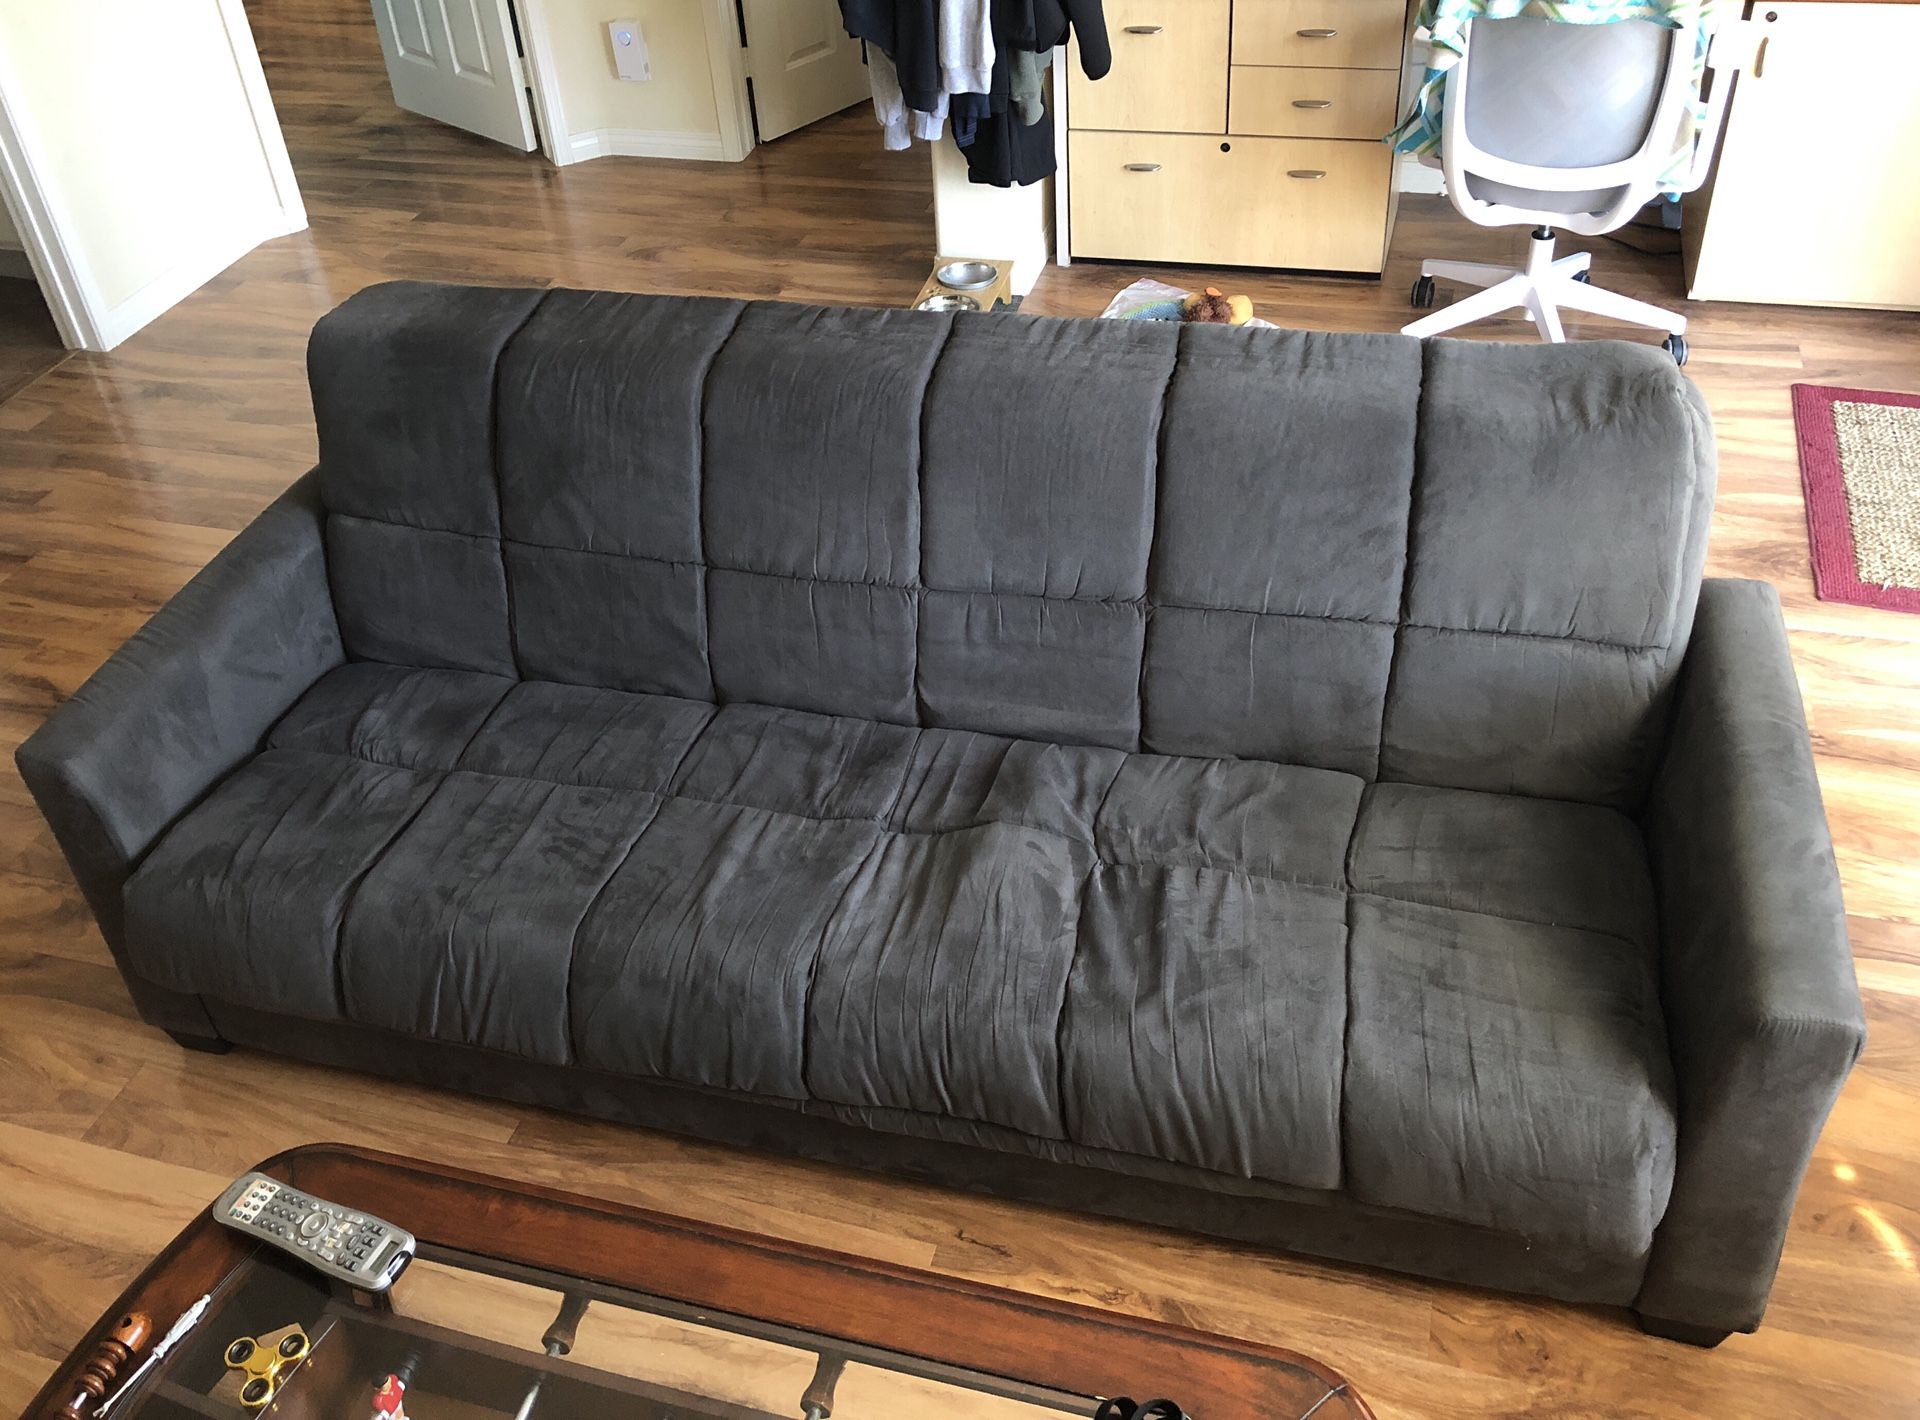 Couch with pullout bed